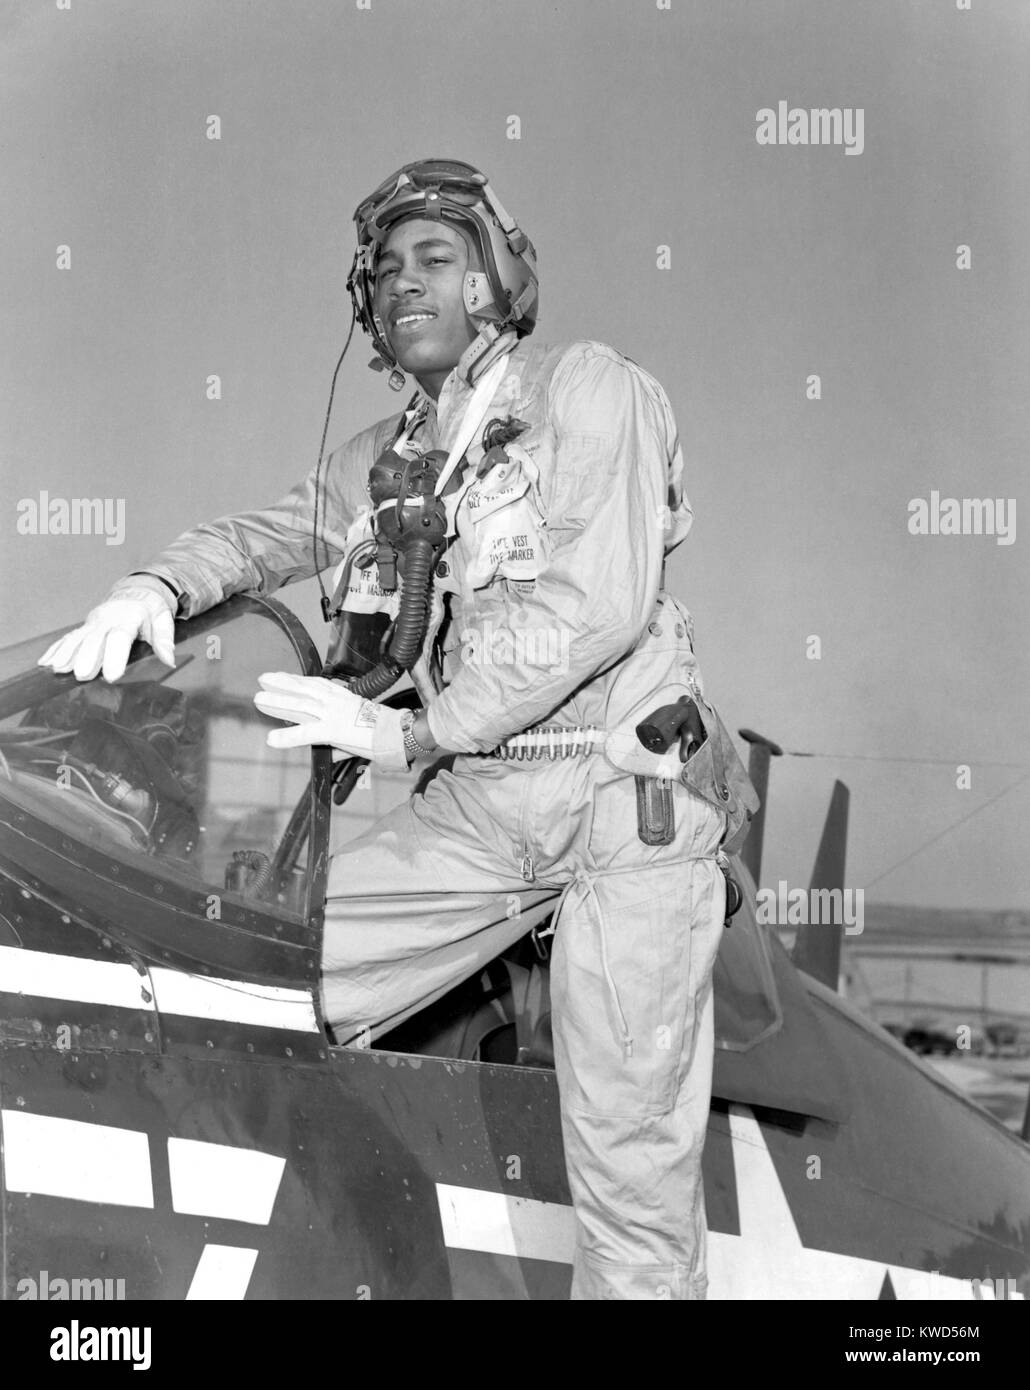 African American aviator of the 1st Marine Aircraft Wing in Korea climbs from his Corsair fighter bomber. April 19, 1953. Korean War, 1950-53. (BSLOC 2014 11 208) Stock Photo